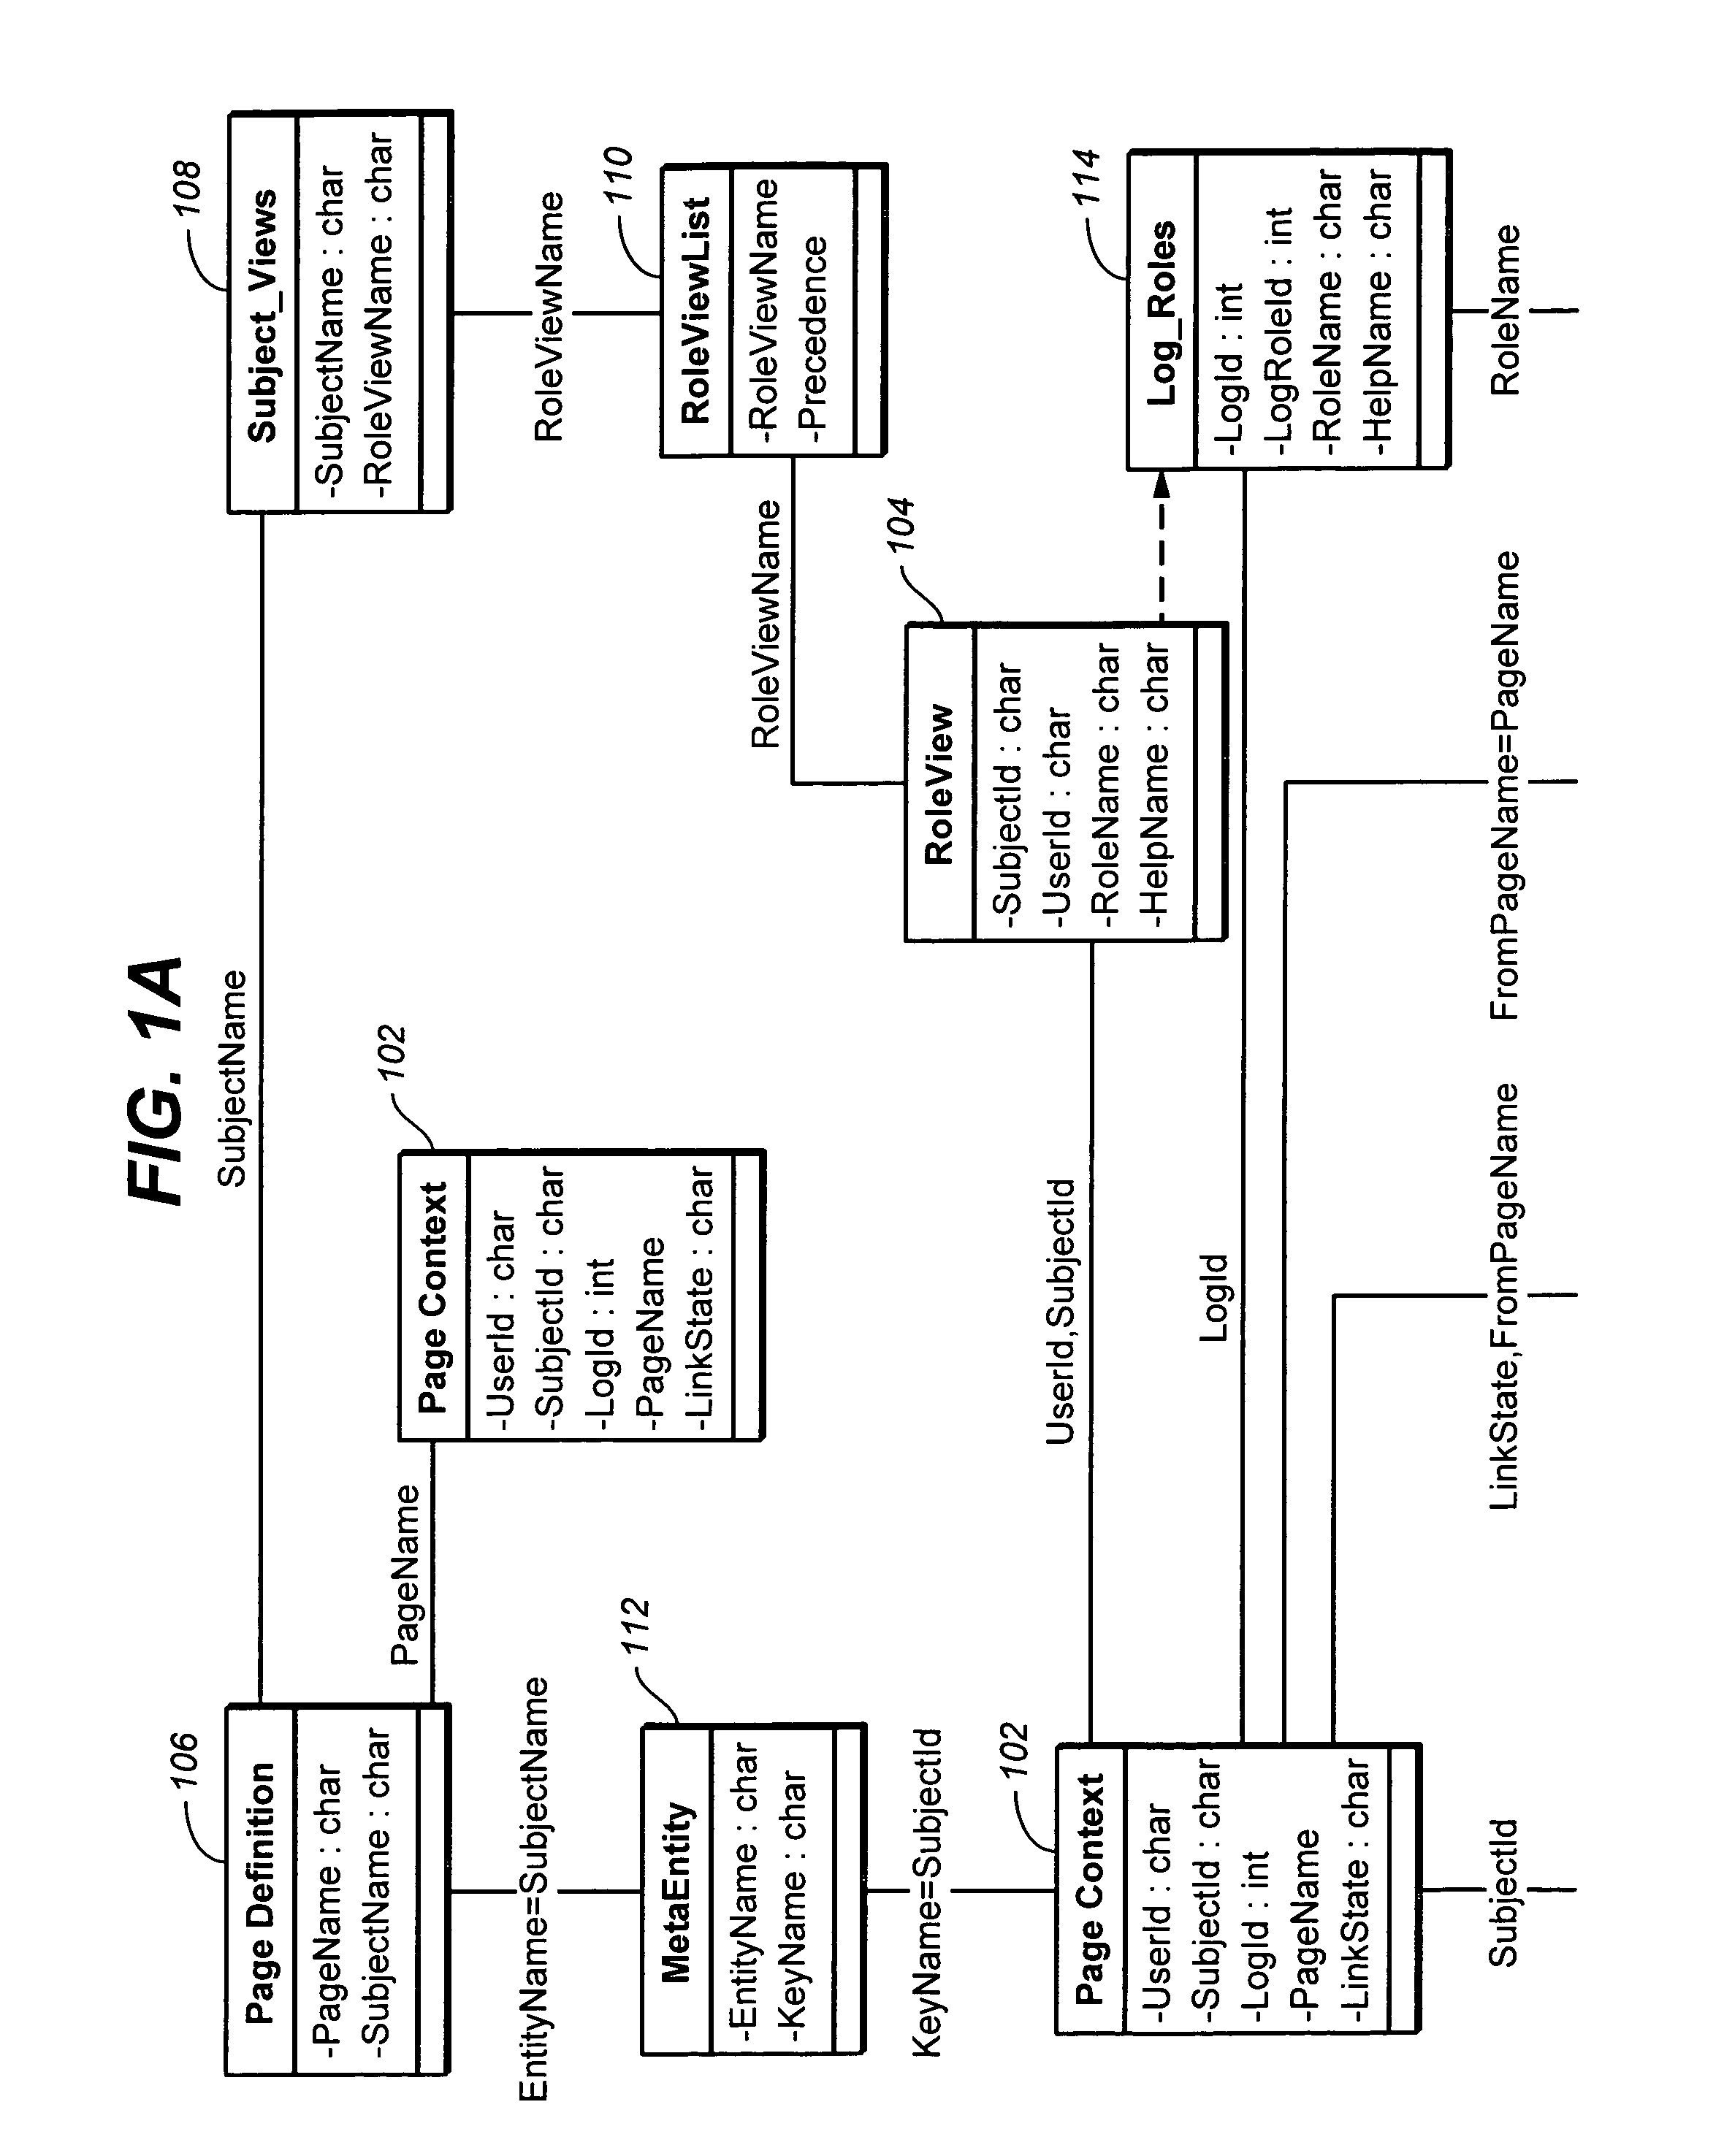 Database system and method for access control and workflow routing